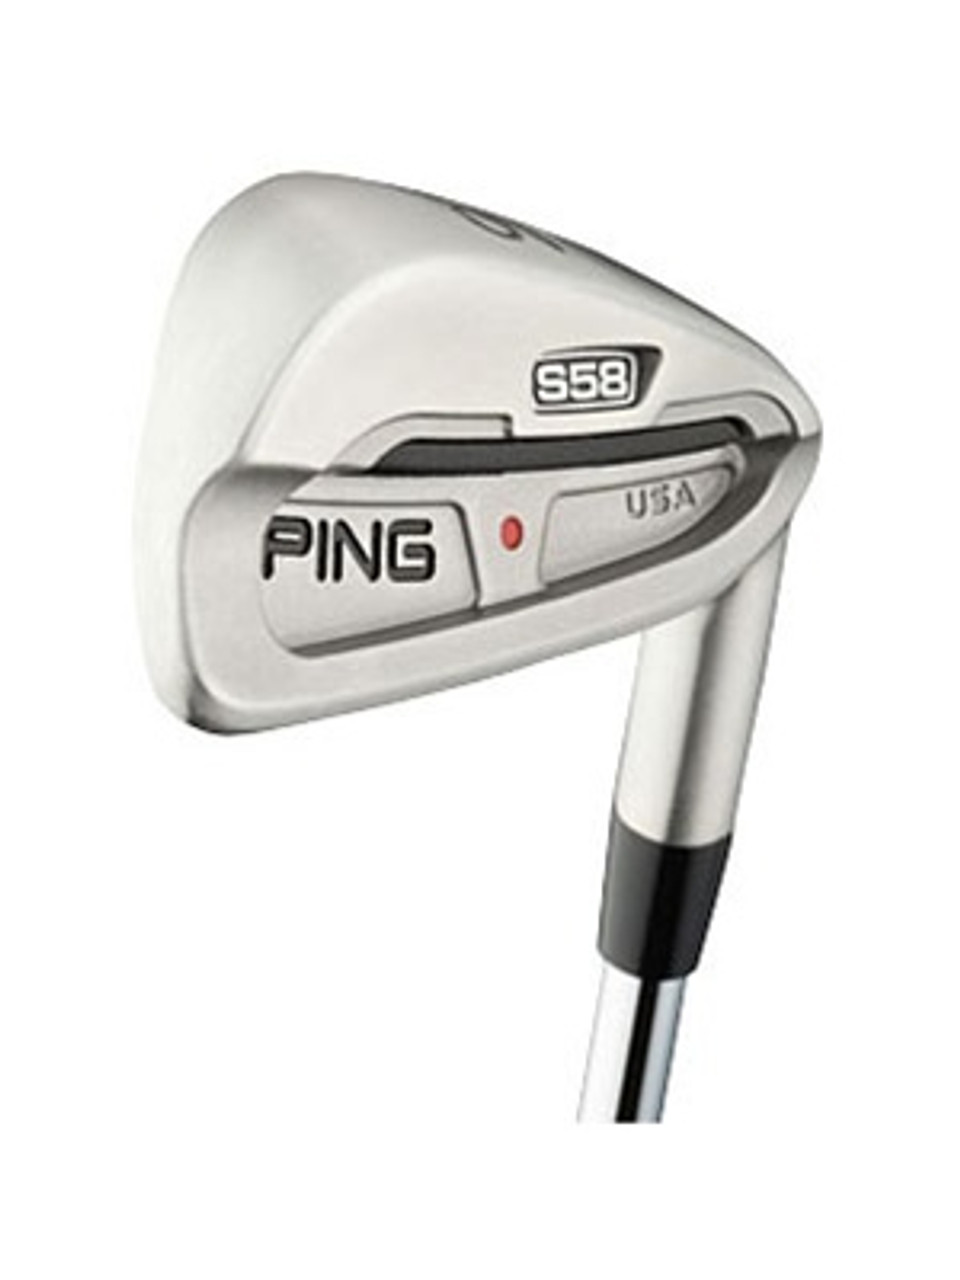 PING Men's S58 Individual Irons - REPLACEMENT IRONS ONLY